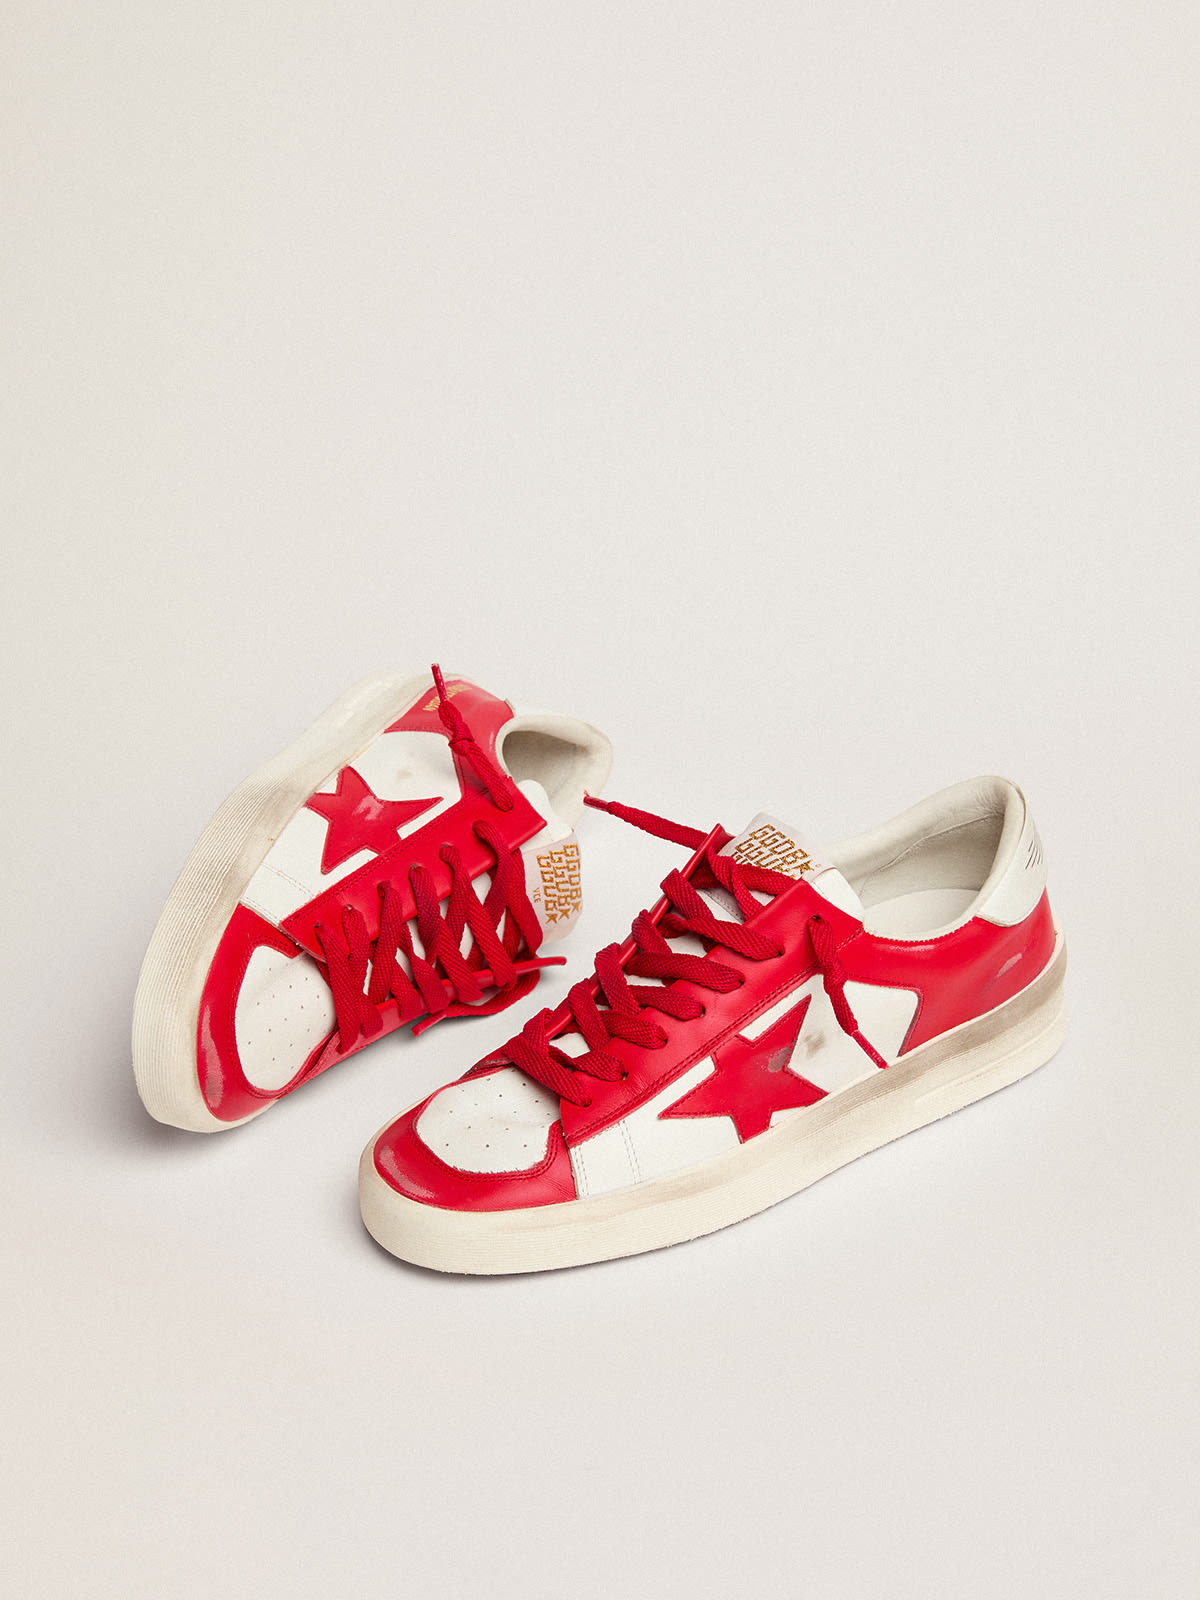 Golden Goose - Women’s Stardan sneakers in red and white leather in 